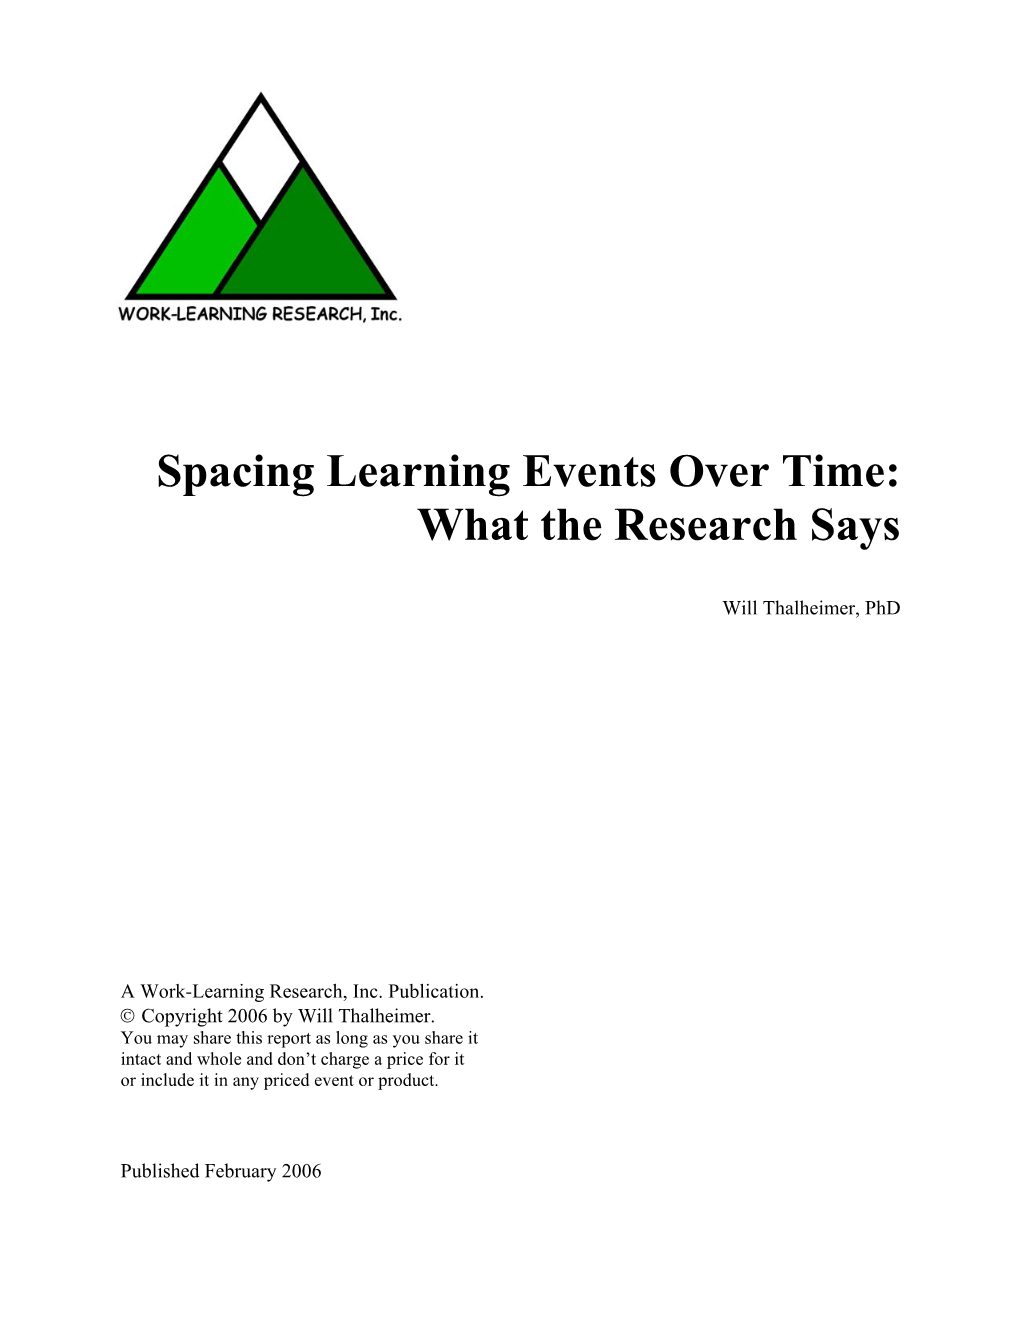 Spacing Learning Events Over Time: What the Research Says